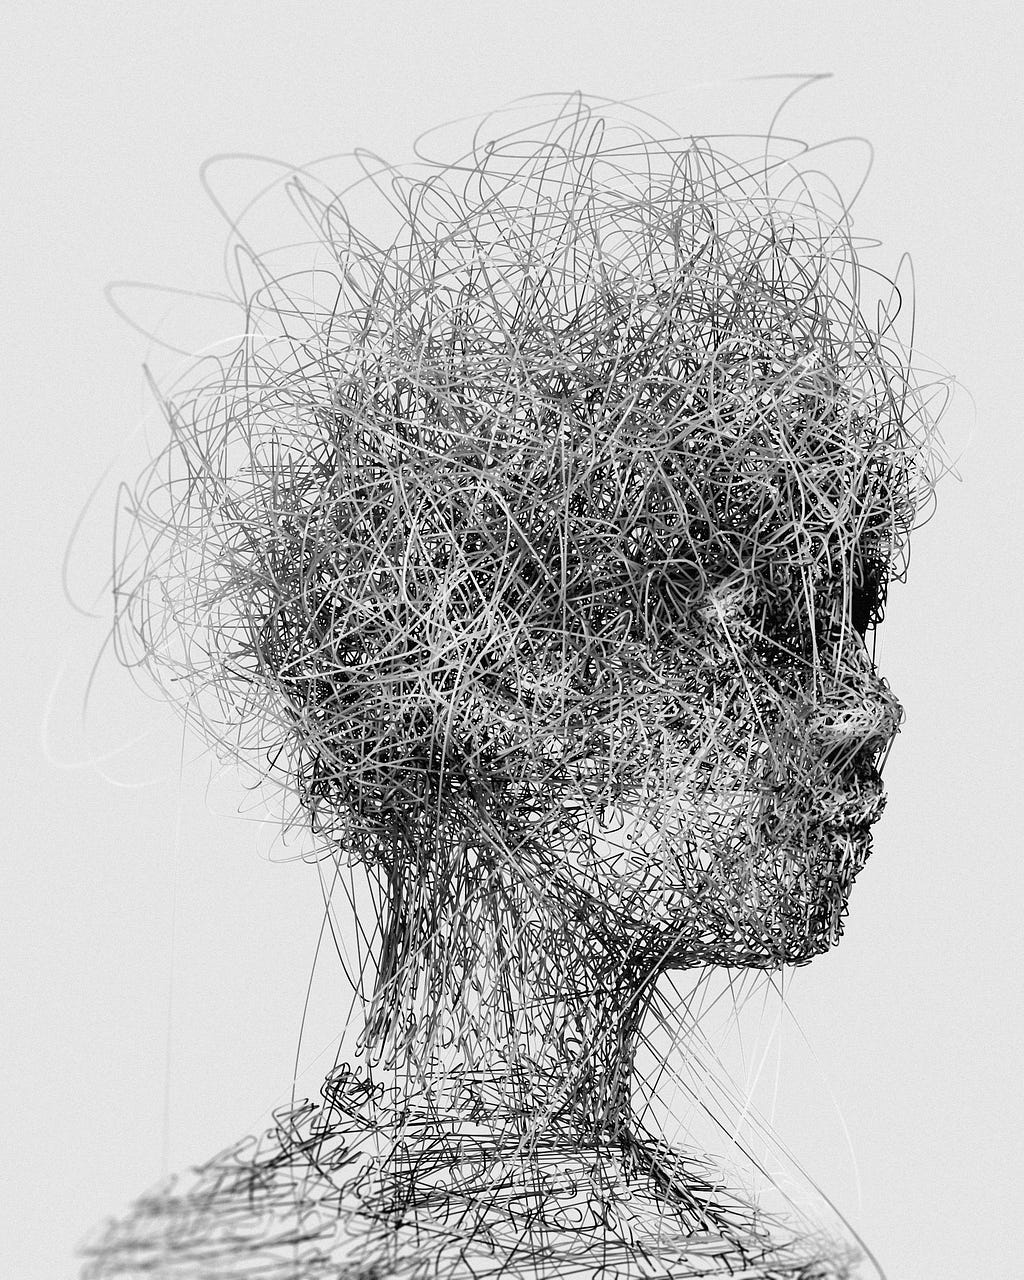 A tangled image of a person